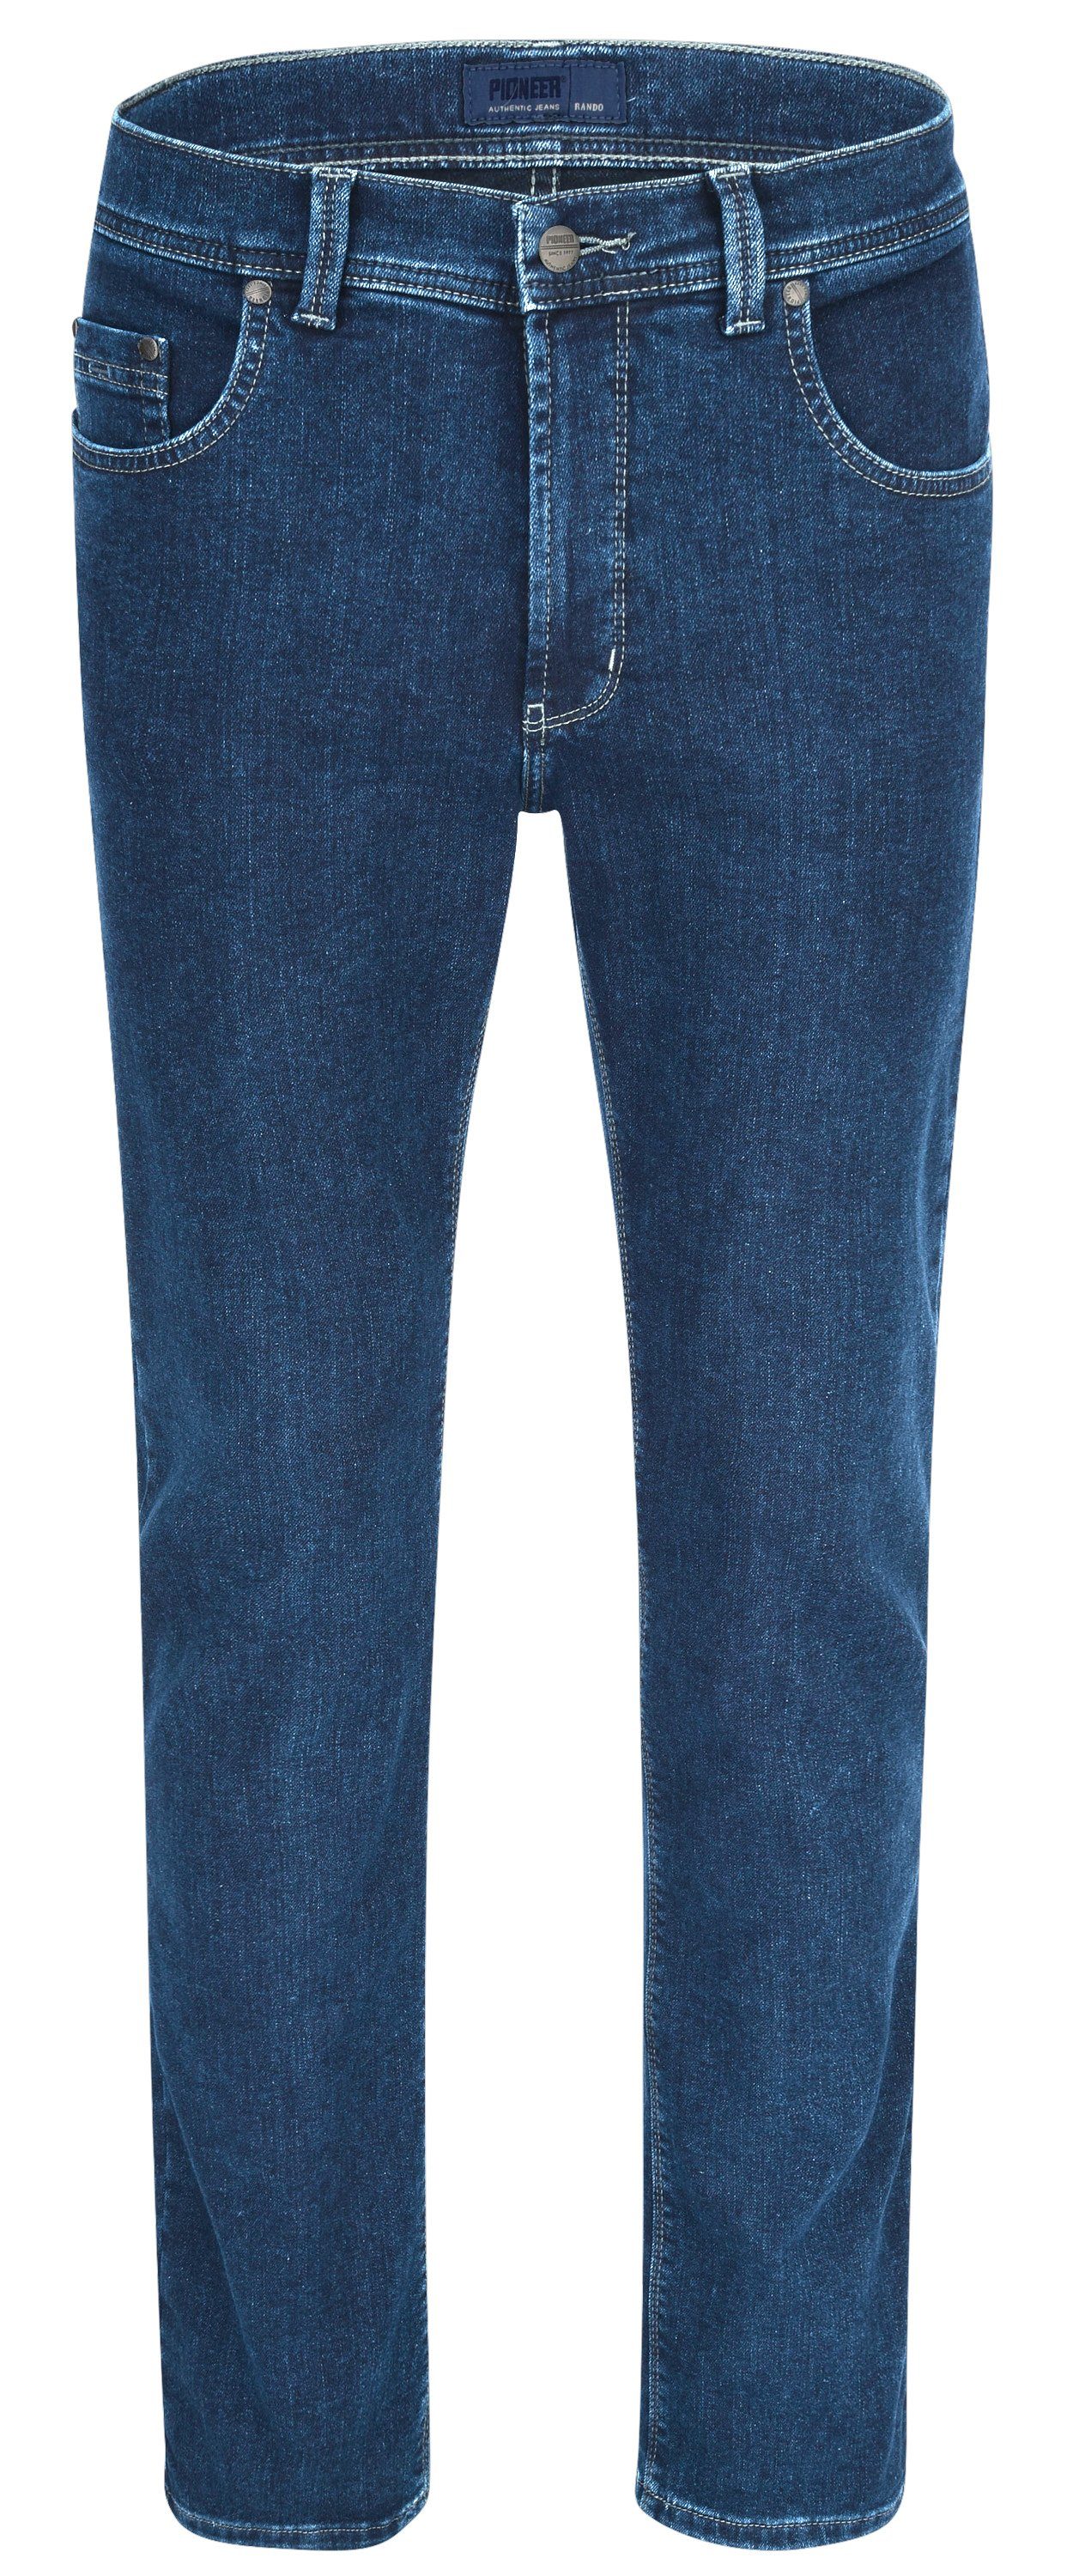 Pioneer Authentic Jeans 5-Pocket-Jeans PIONEER RANDO blue denim 1680 9504.05 - THERMO | Straight-Fit Jeans